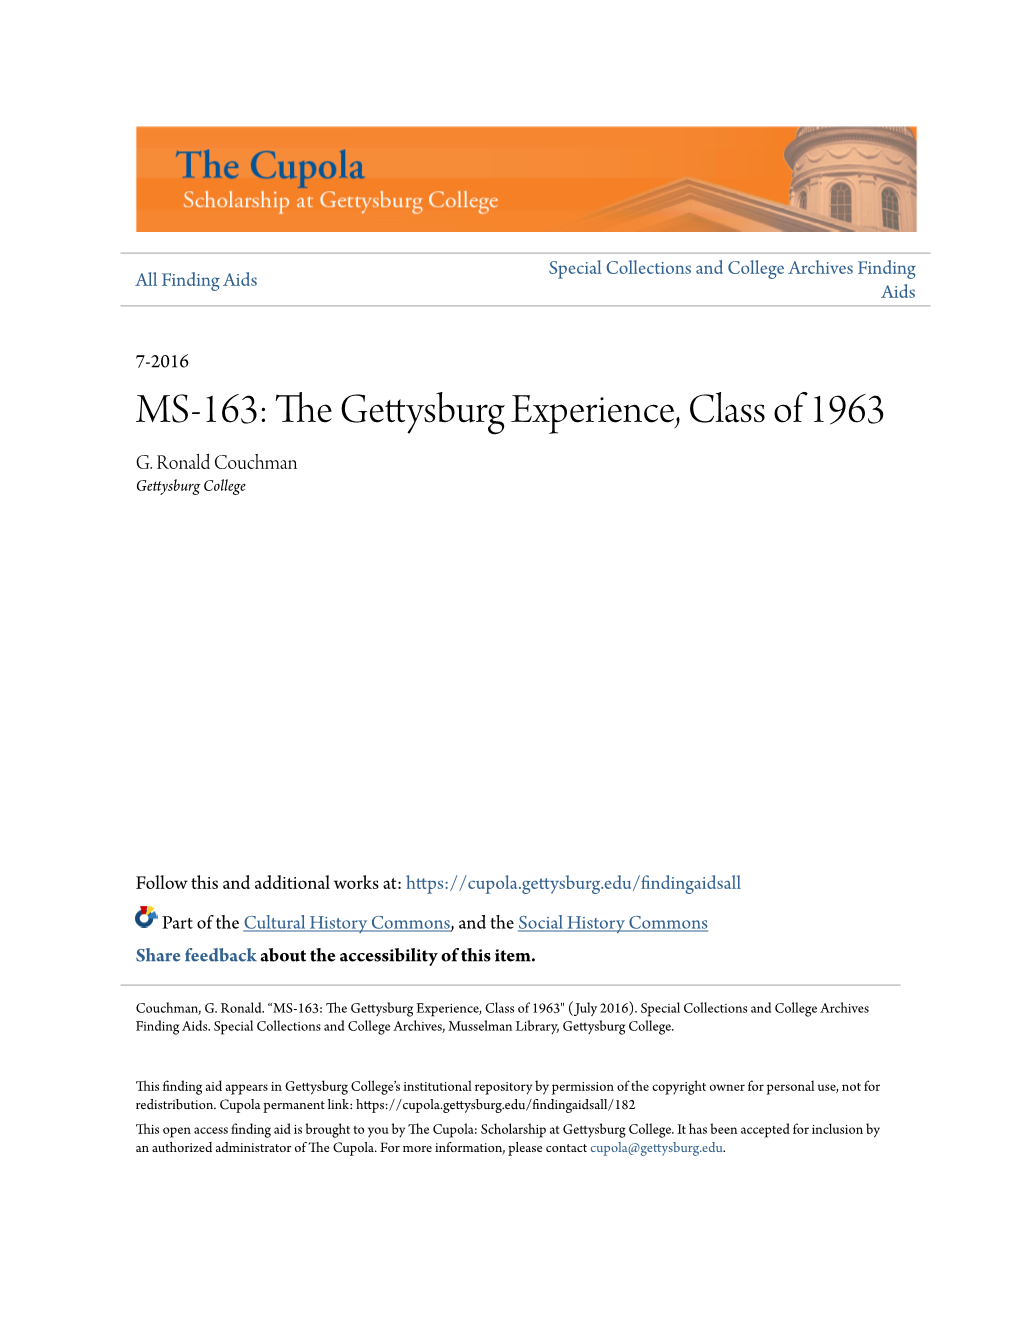 The Gettysburg Experience, Class of 1963 G